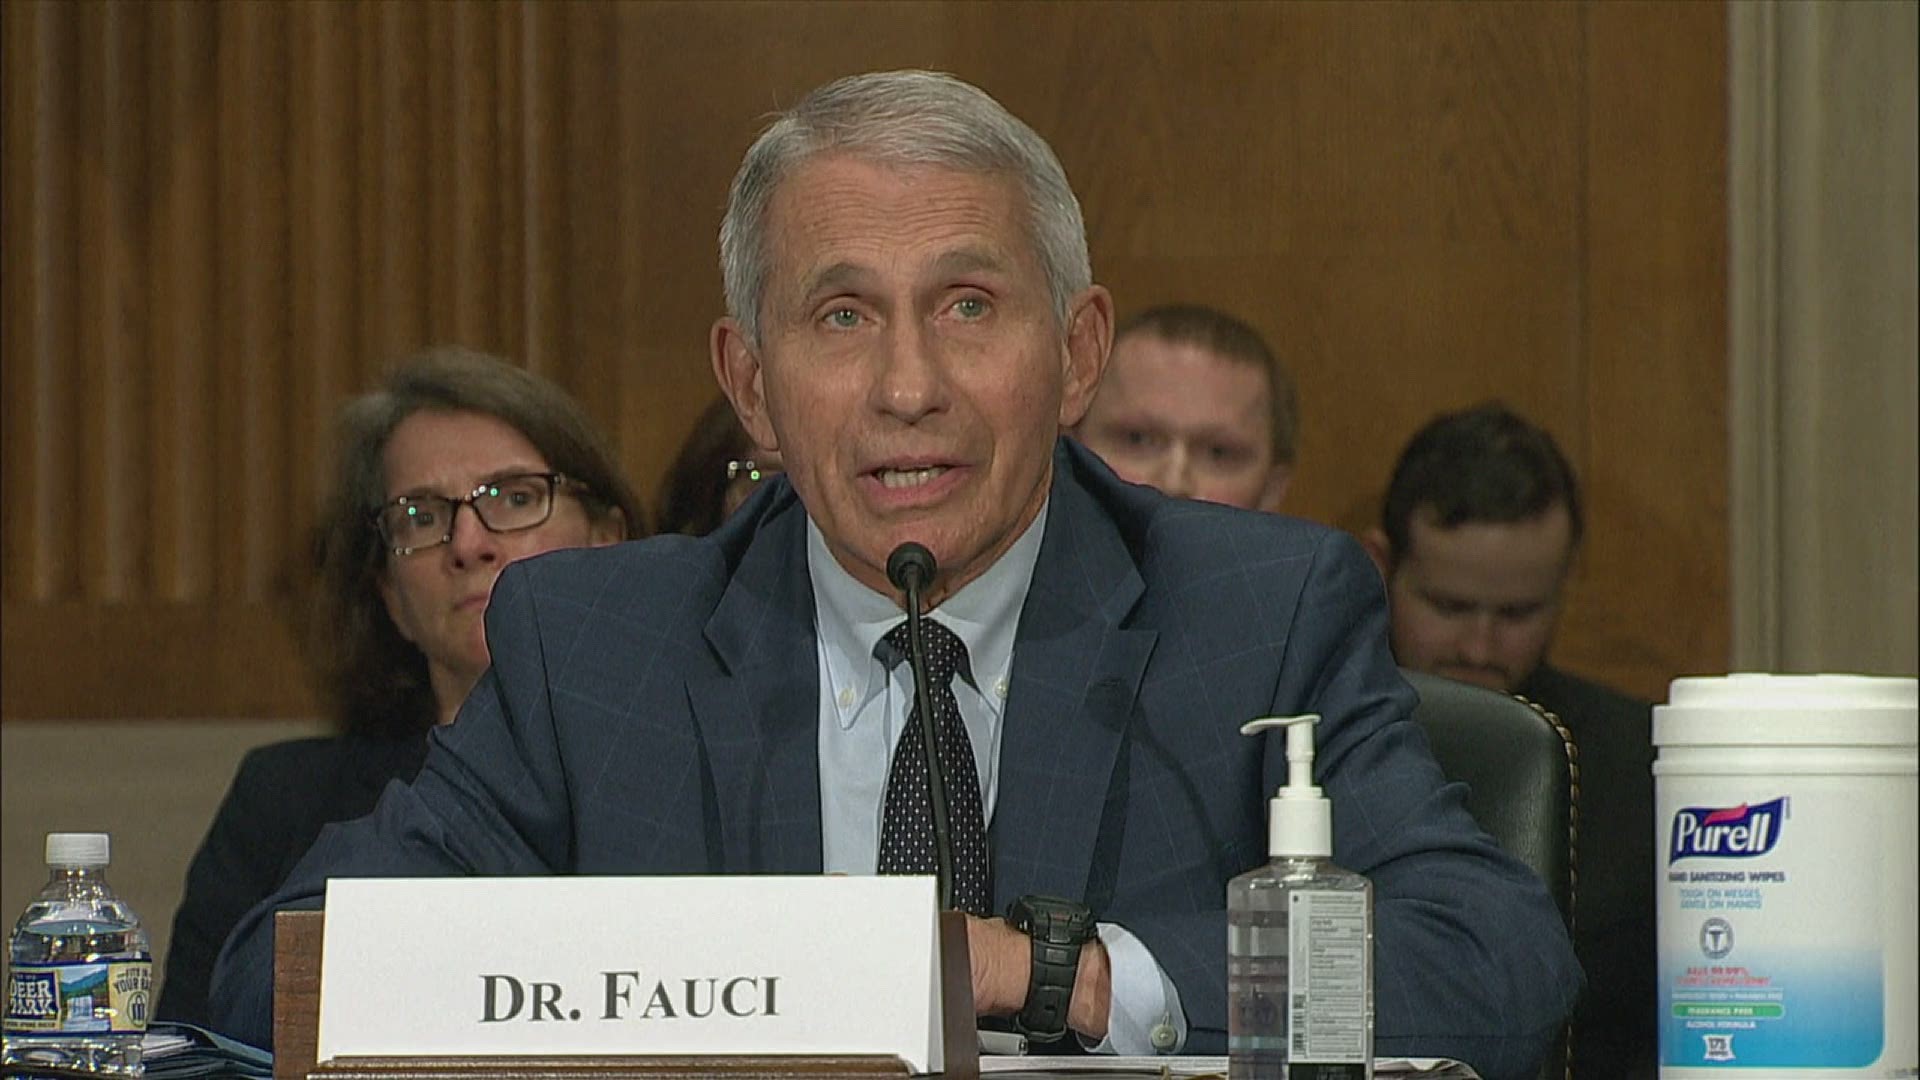 Fauci rejected Paul’s insinuation that the U.S. helped fund research at a Chinese lab that could have sparked the COVID-19 outbreak.